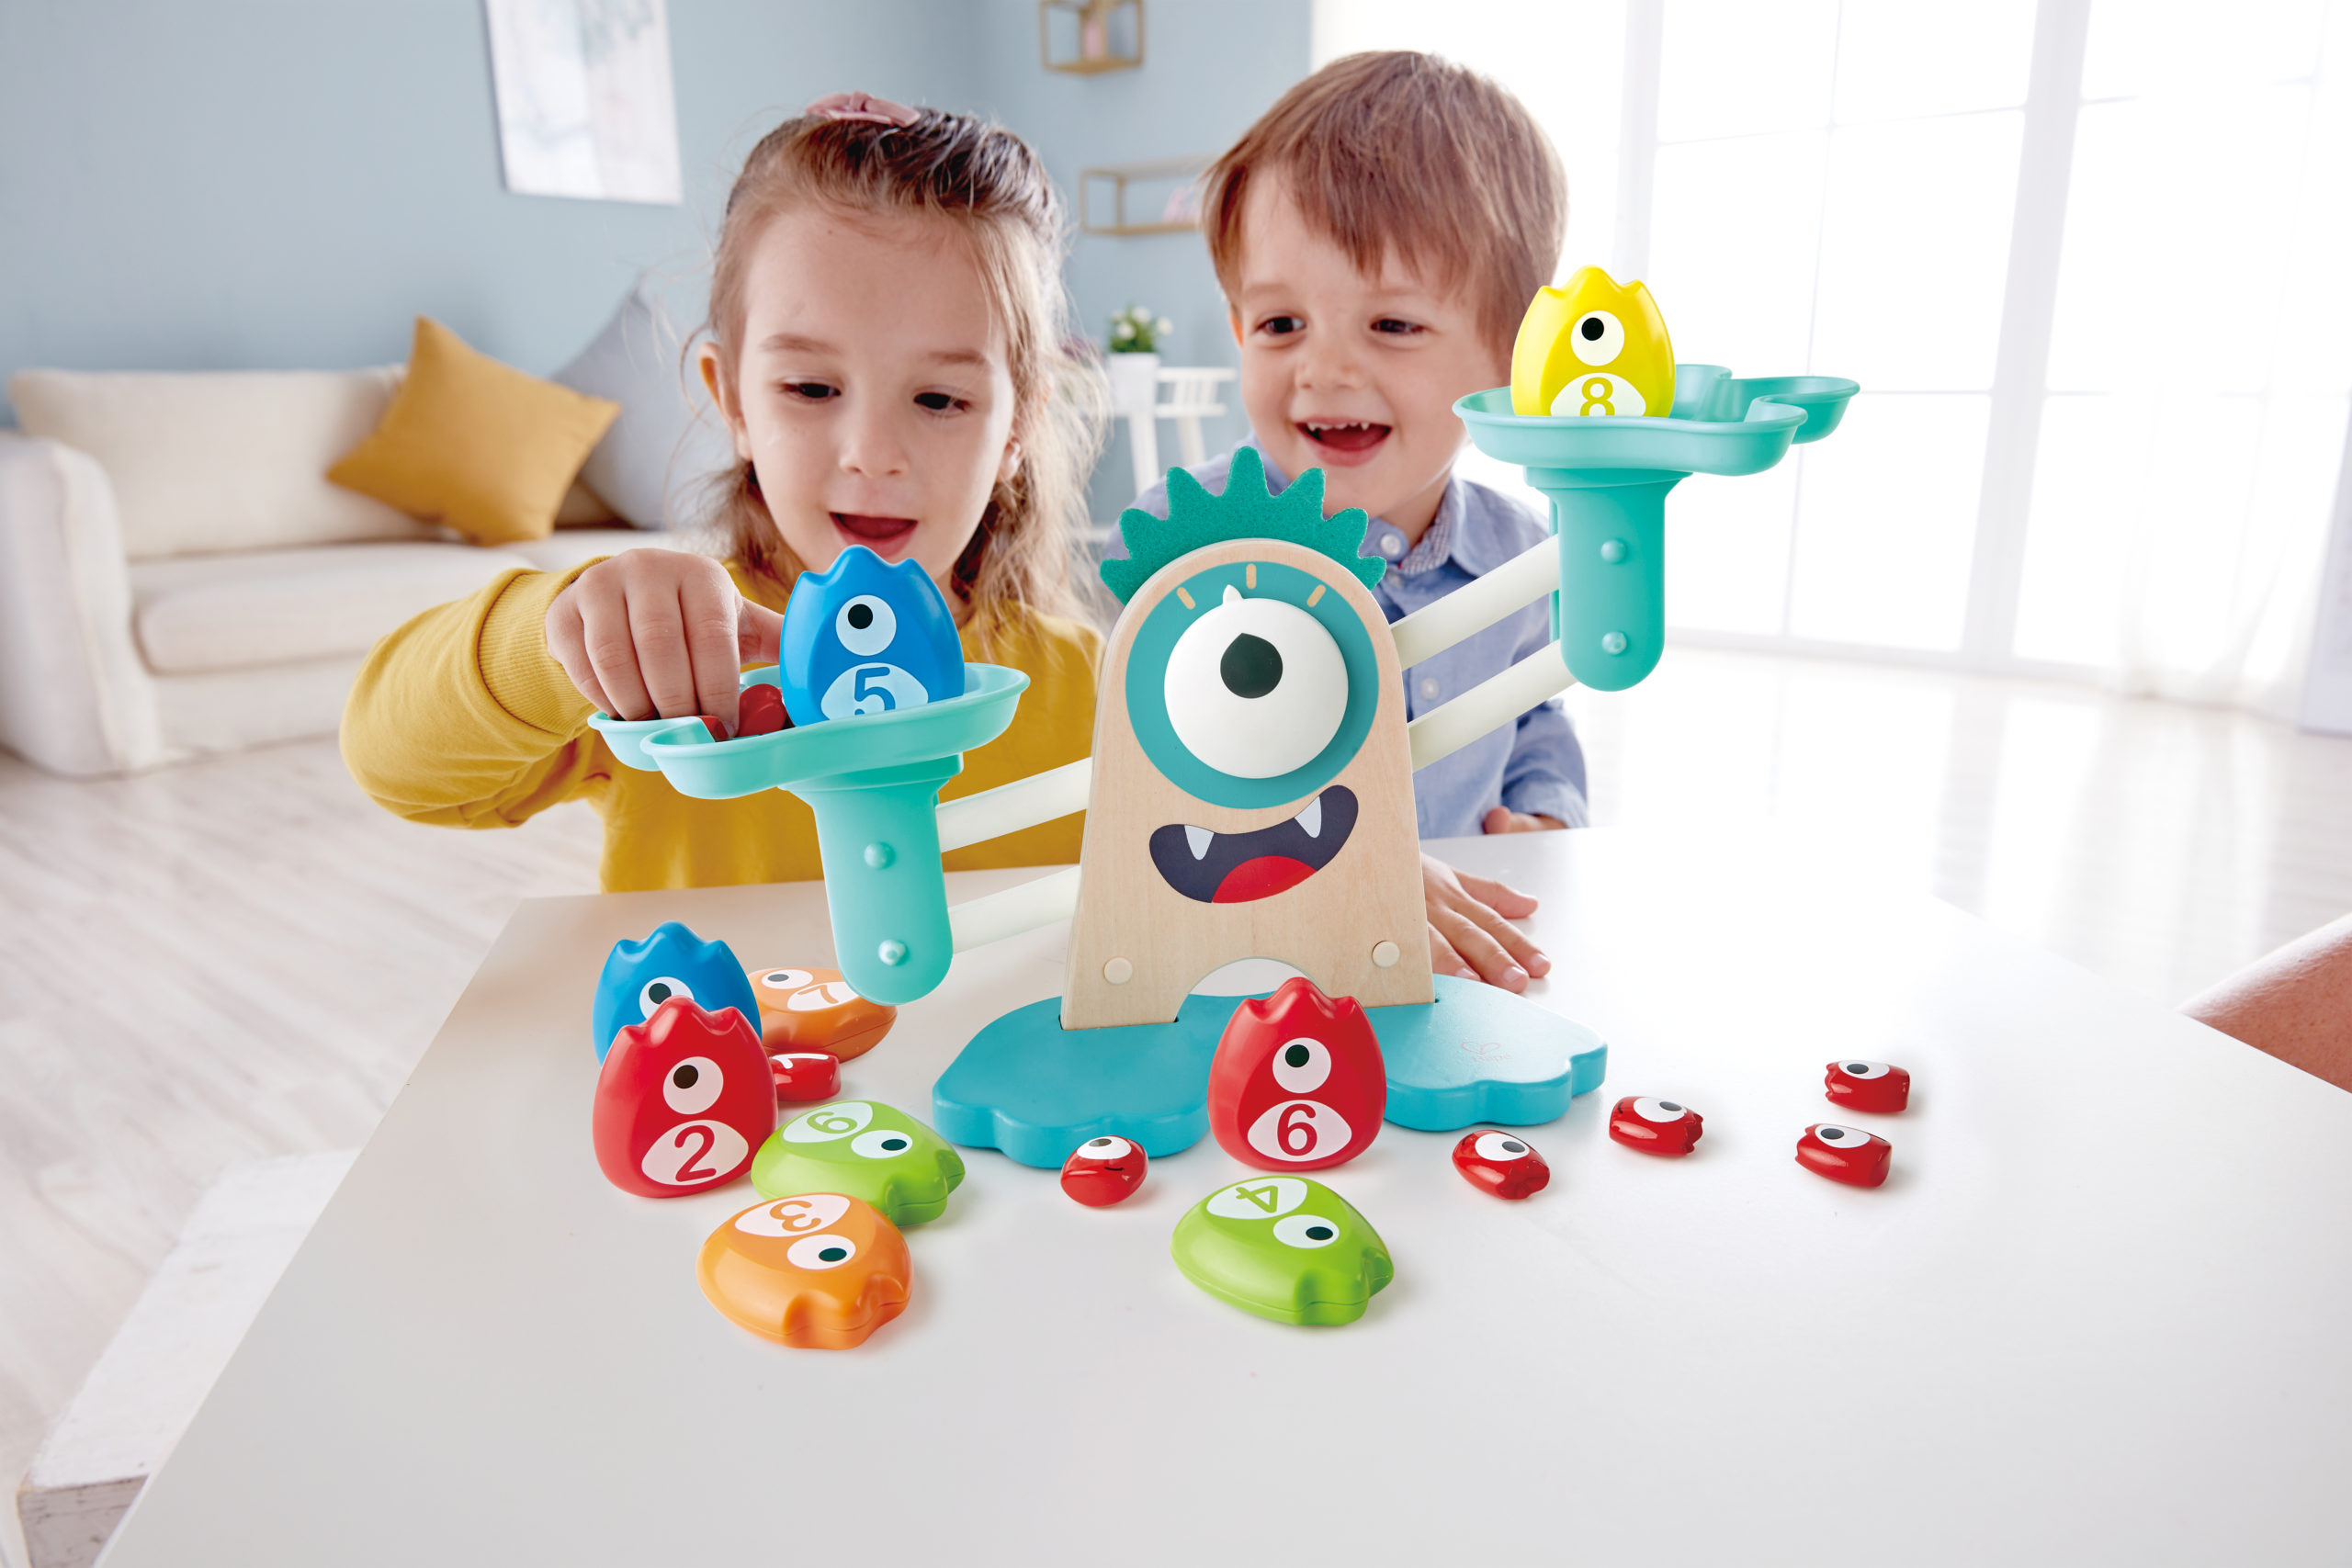 early learning toddler child bathroom water toy from 6 months r.r.p £29.99 NEW 